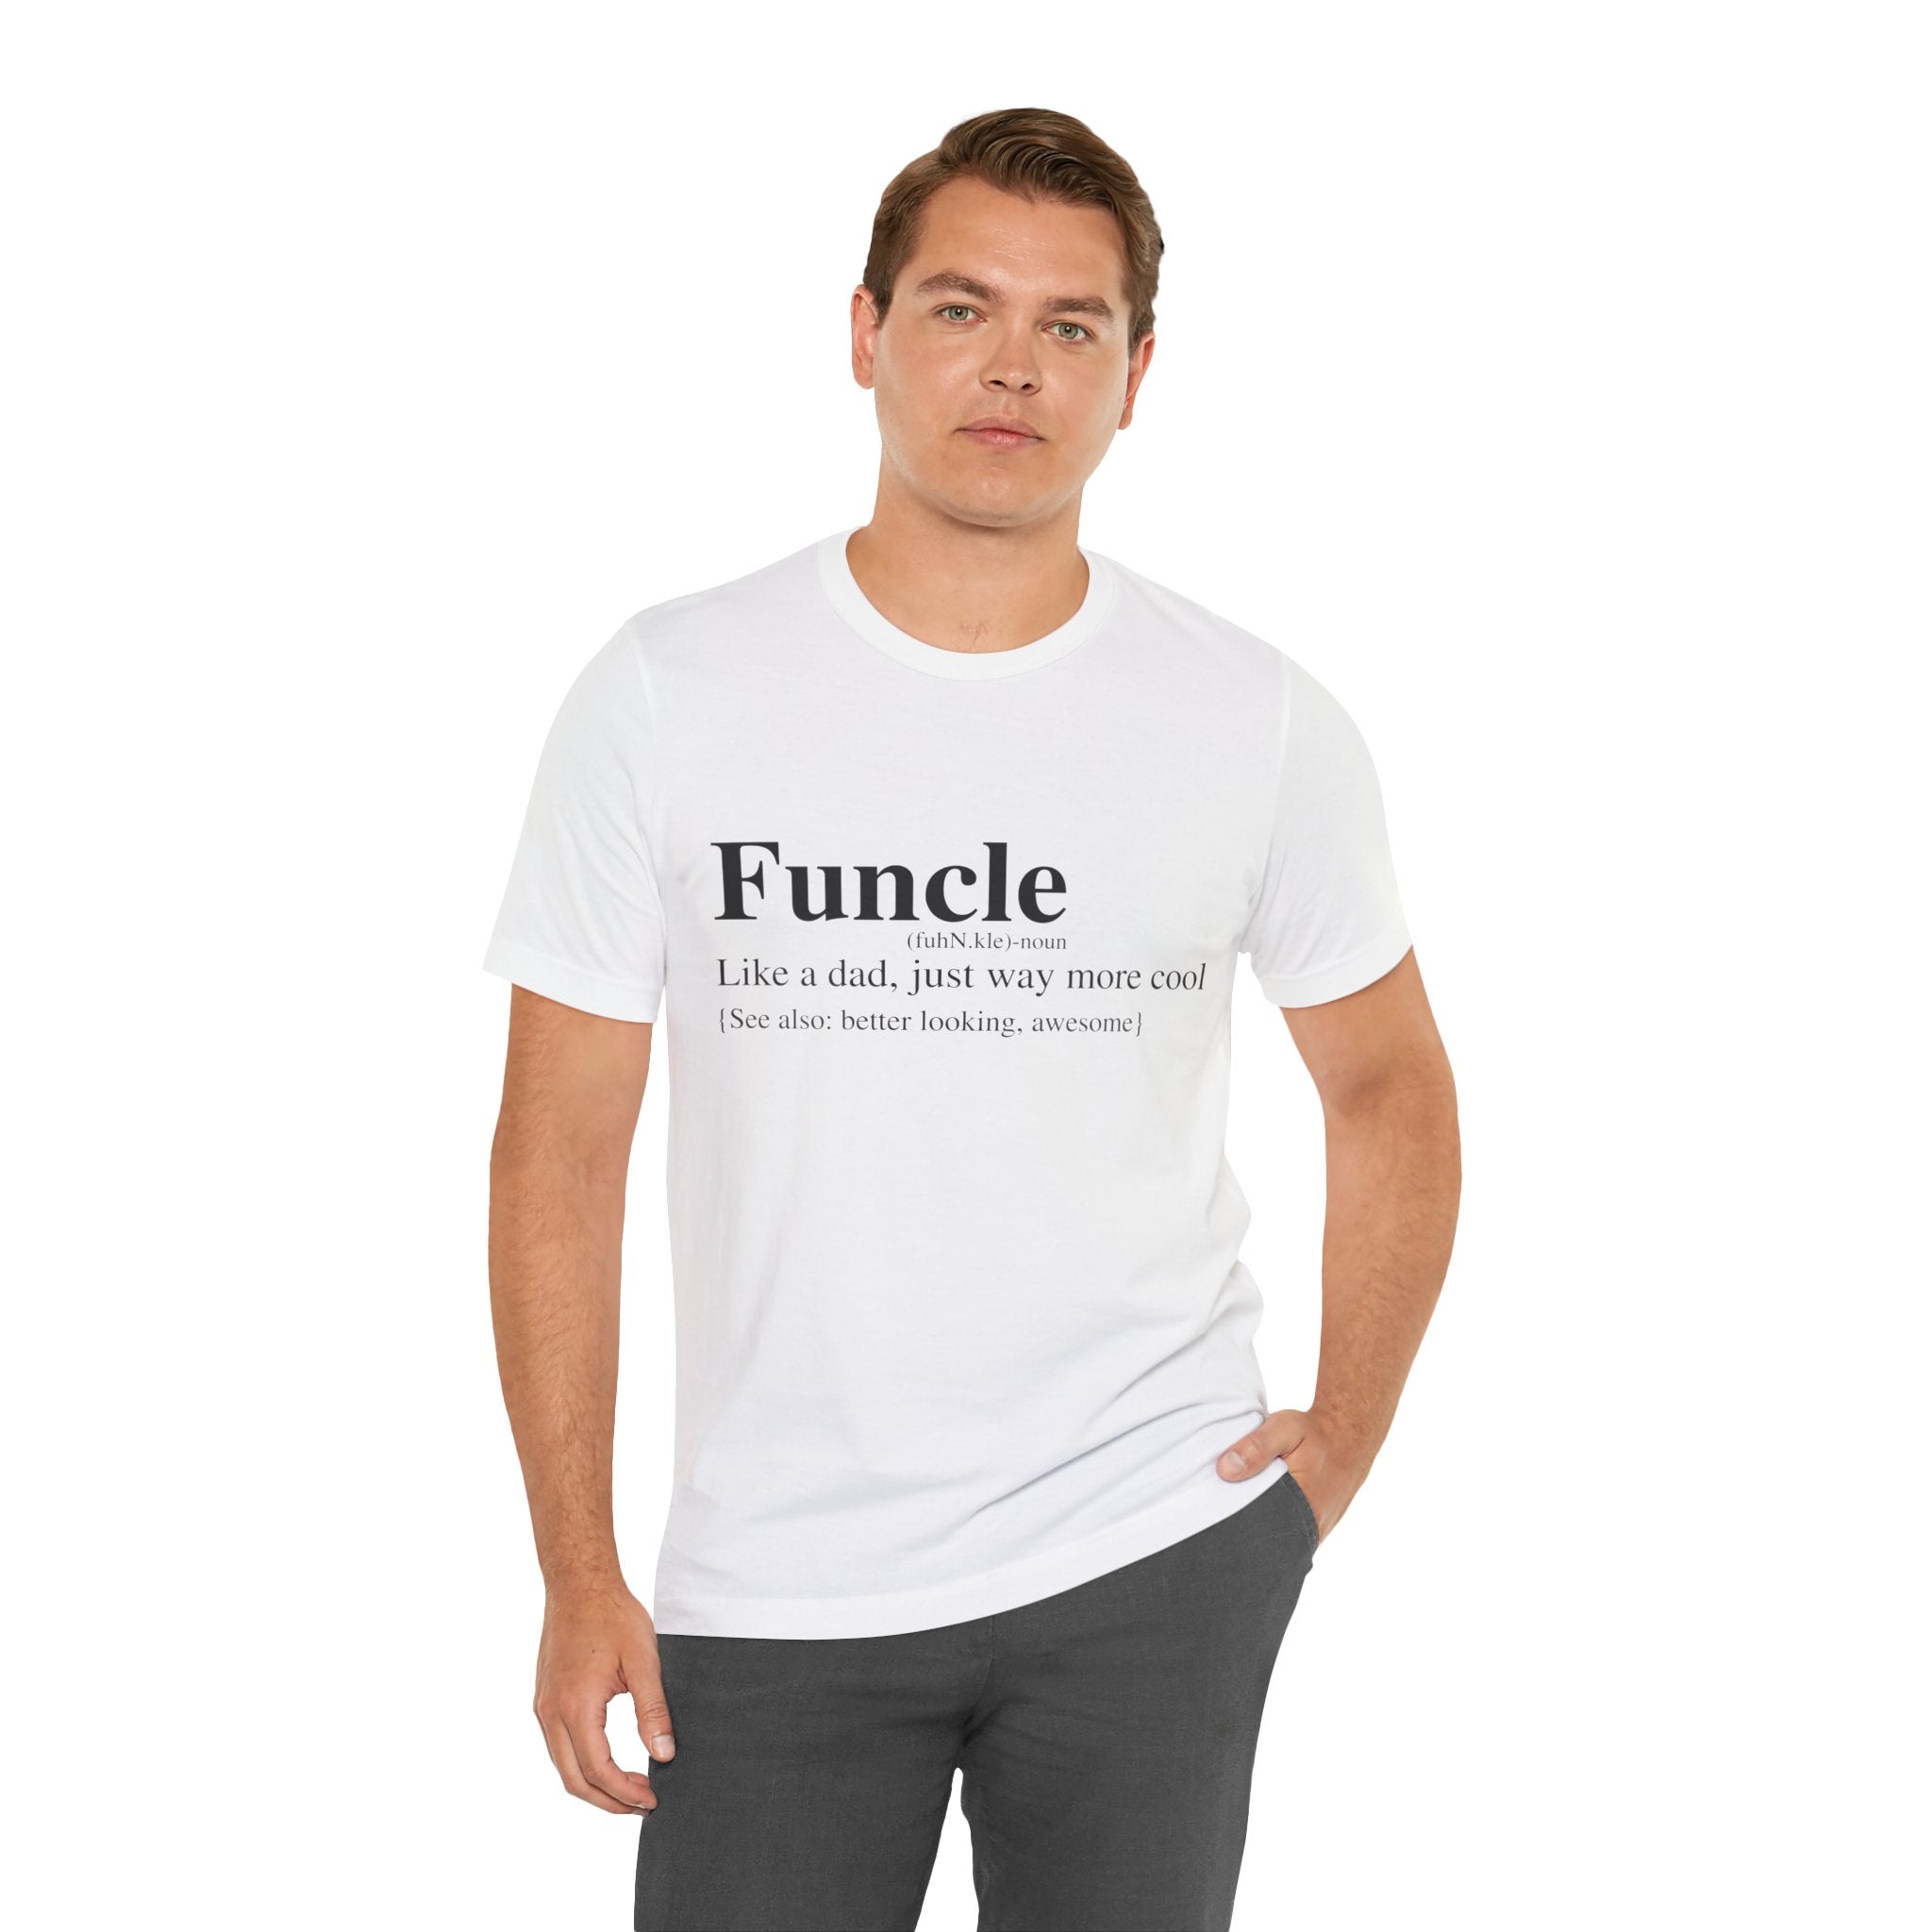 Man in white Funcle T-Shirt with “Funcle - like a dad, just way more cool [see also: better looking, awesomer]” printed on it, standing against a white background